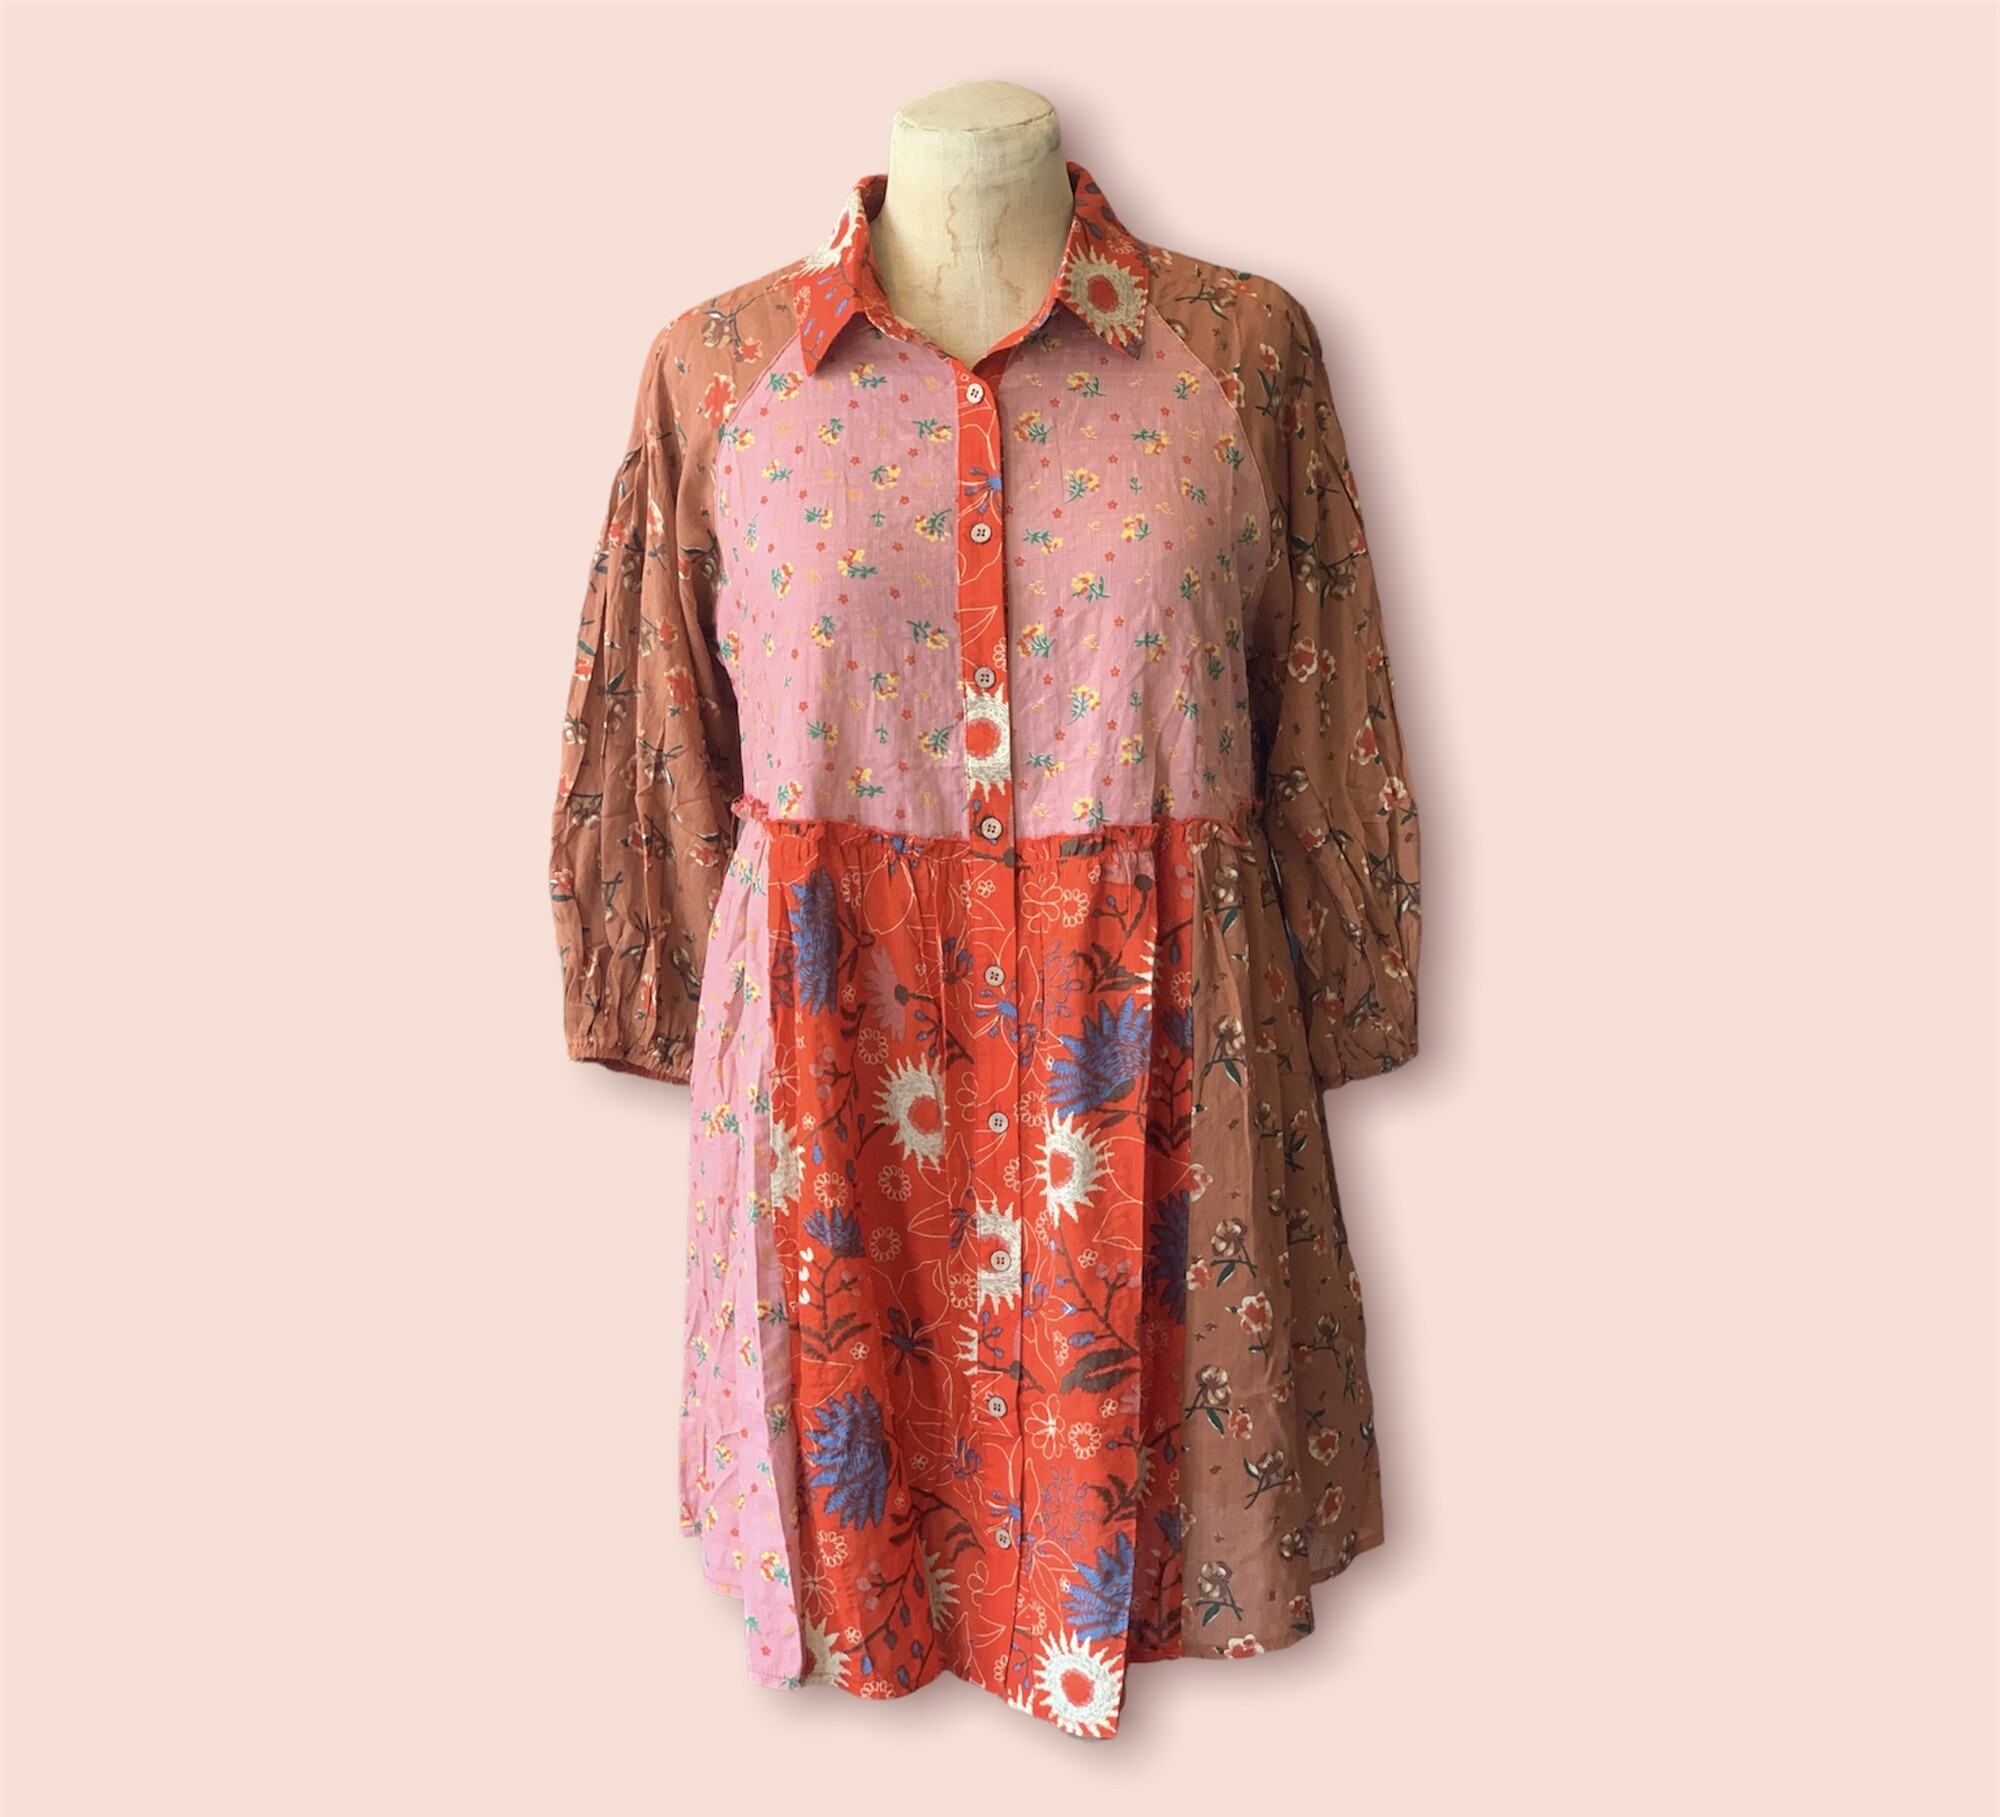 These fabulous dresses have a mix of floral patterns in browns, pinks, and reds! The collar and cinched wrists give this dress a more unique and fashionable look, perfect to throw on and go!